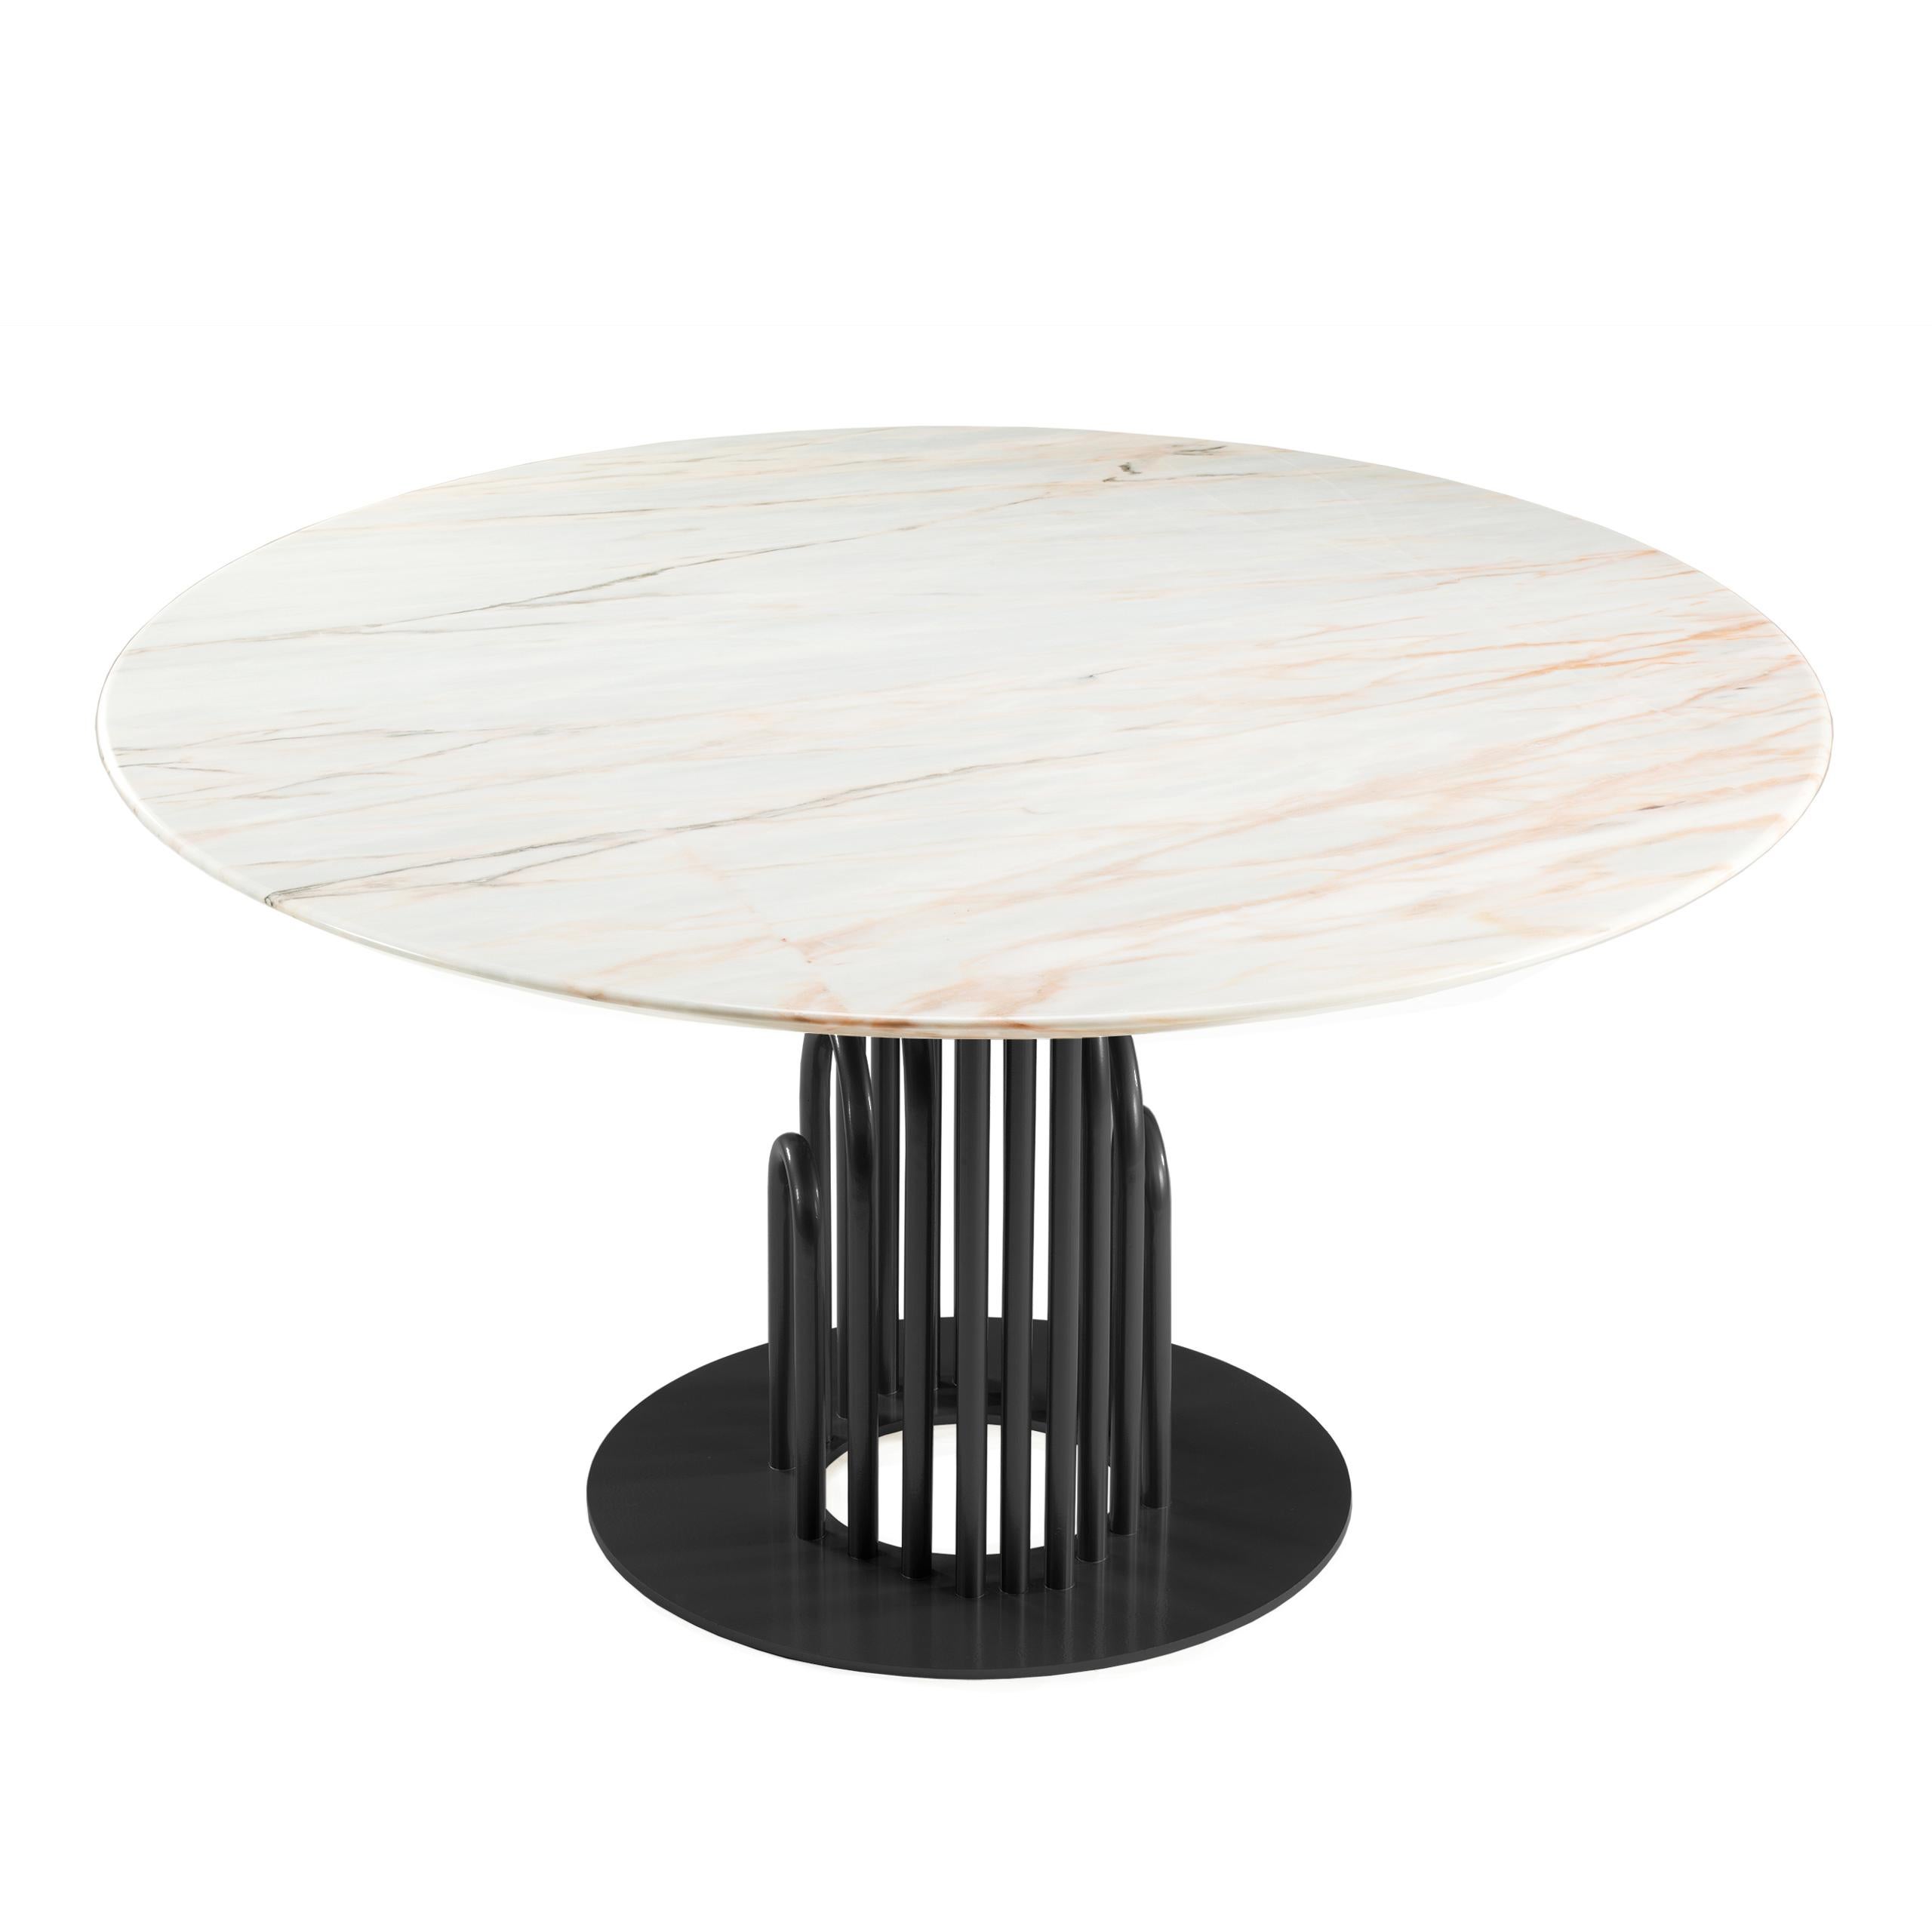 Bara dinner table:
150cm Diameter Top in Estremoz White Marble
Gold Lacquered Metal Base
Made to Order

For sales with delivery address within European territories, VAT will be charged additionally to the stated price.